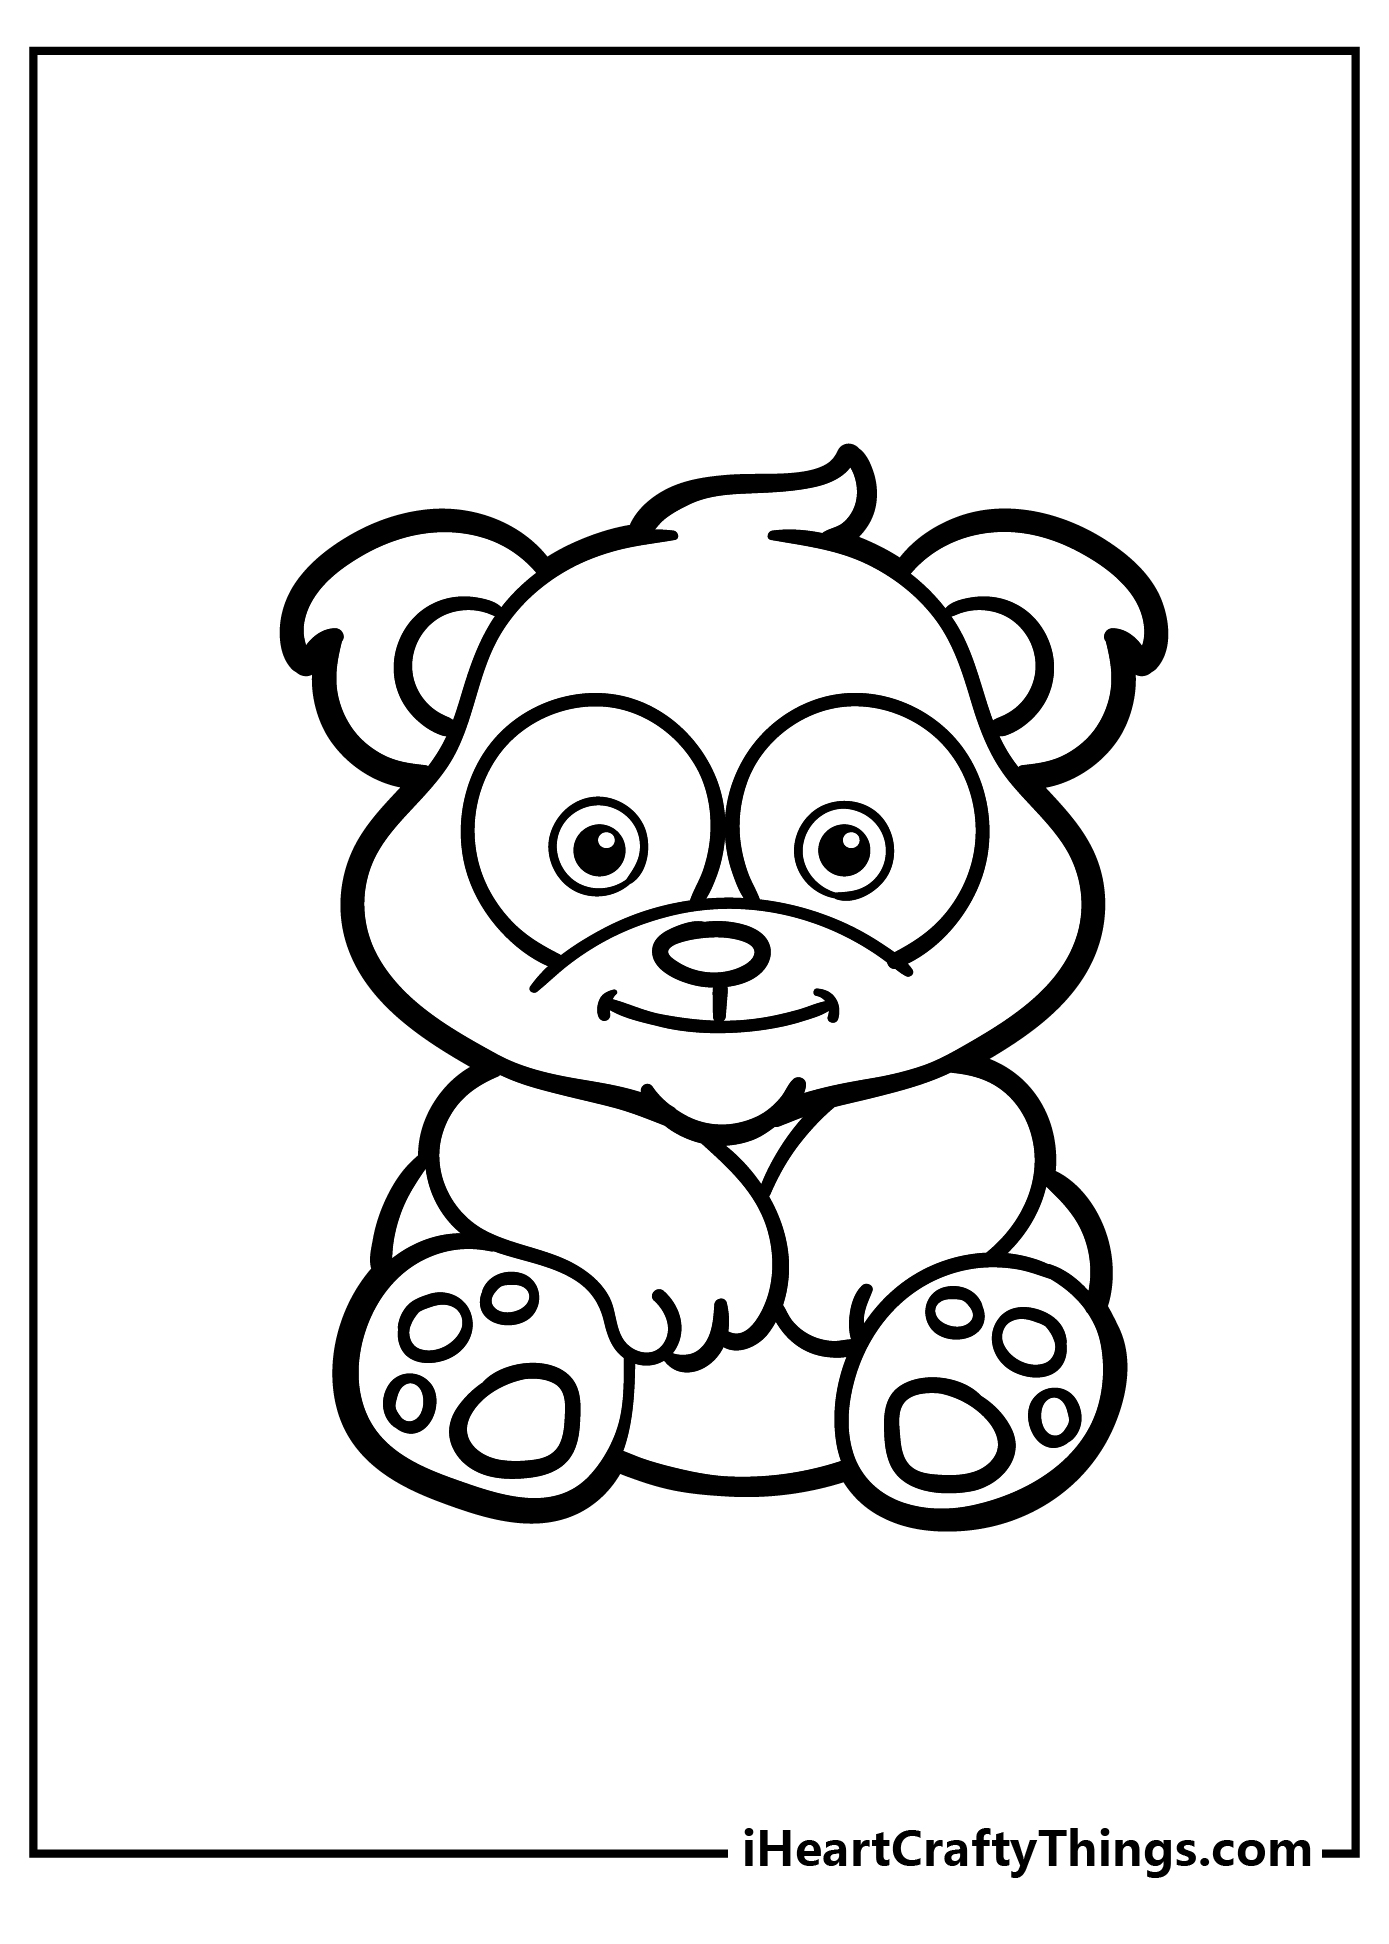 Panda Coloring Pages for kids free download